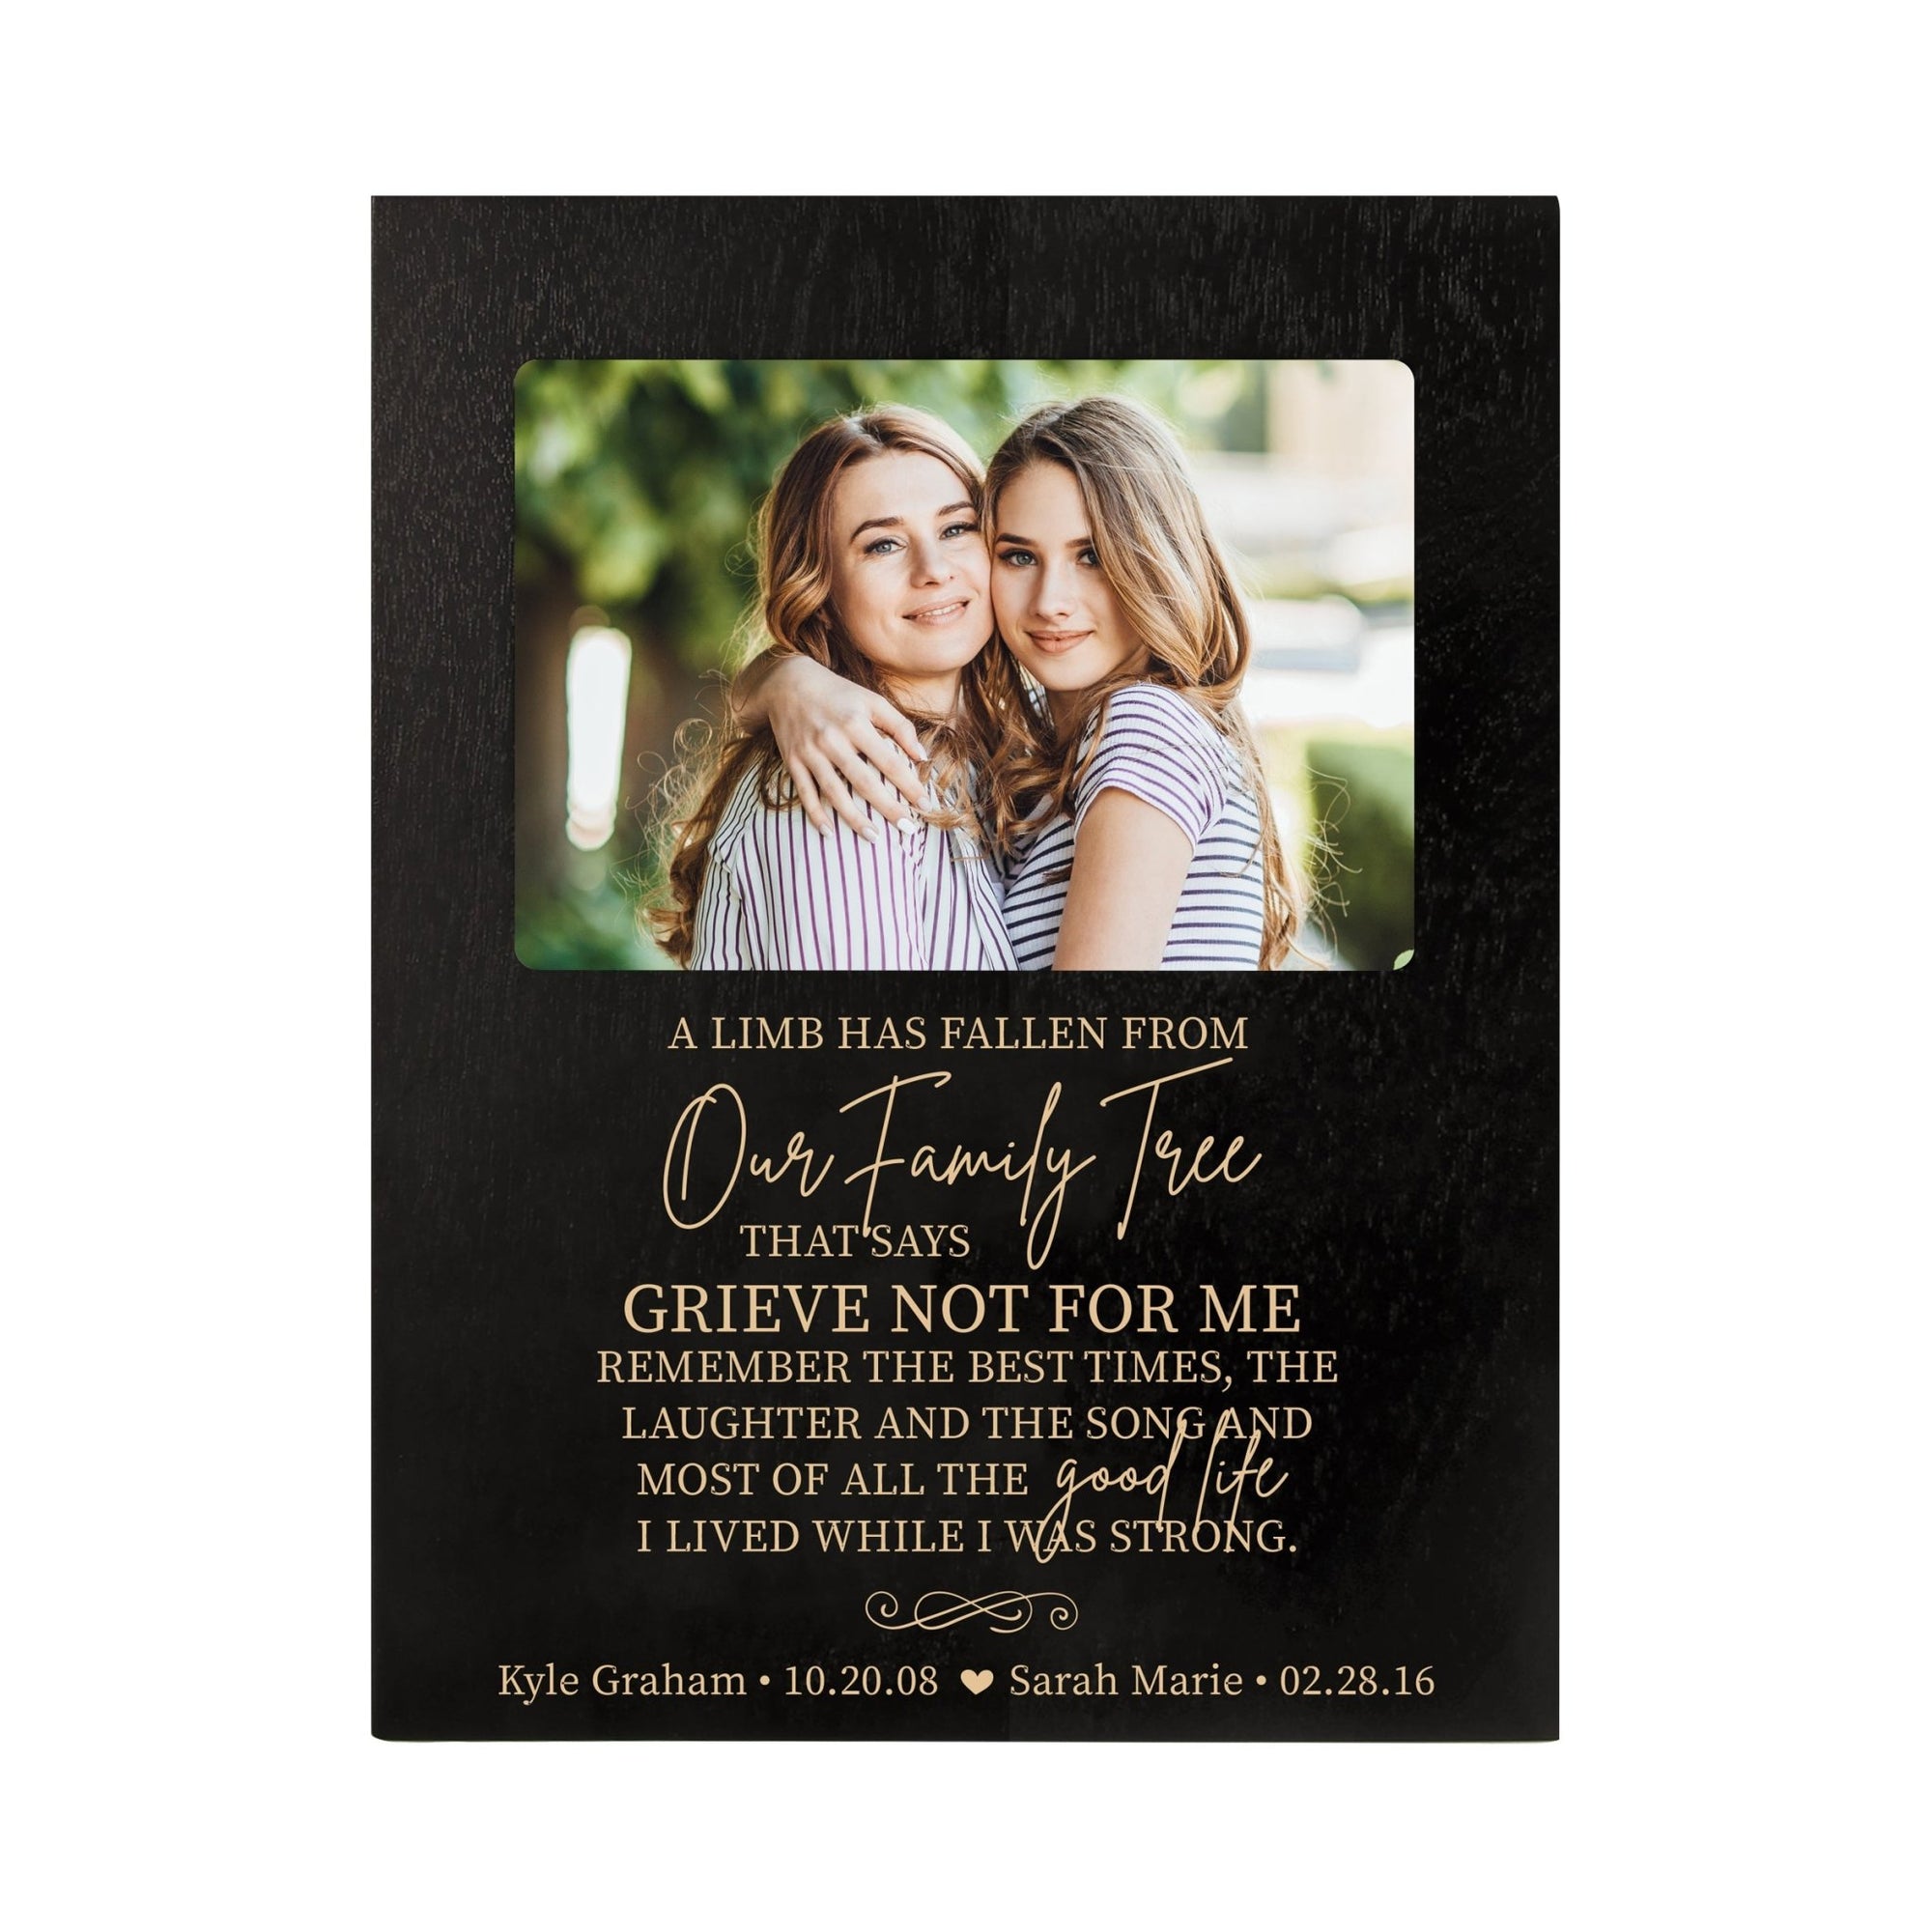 Personalized Wooden Memorial 8x10 Picture Frame holds 4x6 photo A Limb Has Fallen - LifeSong Milestones